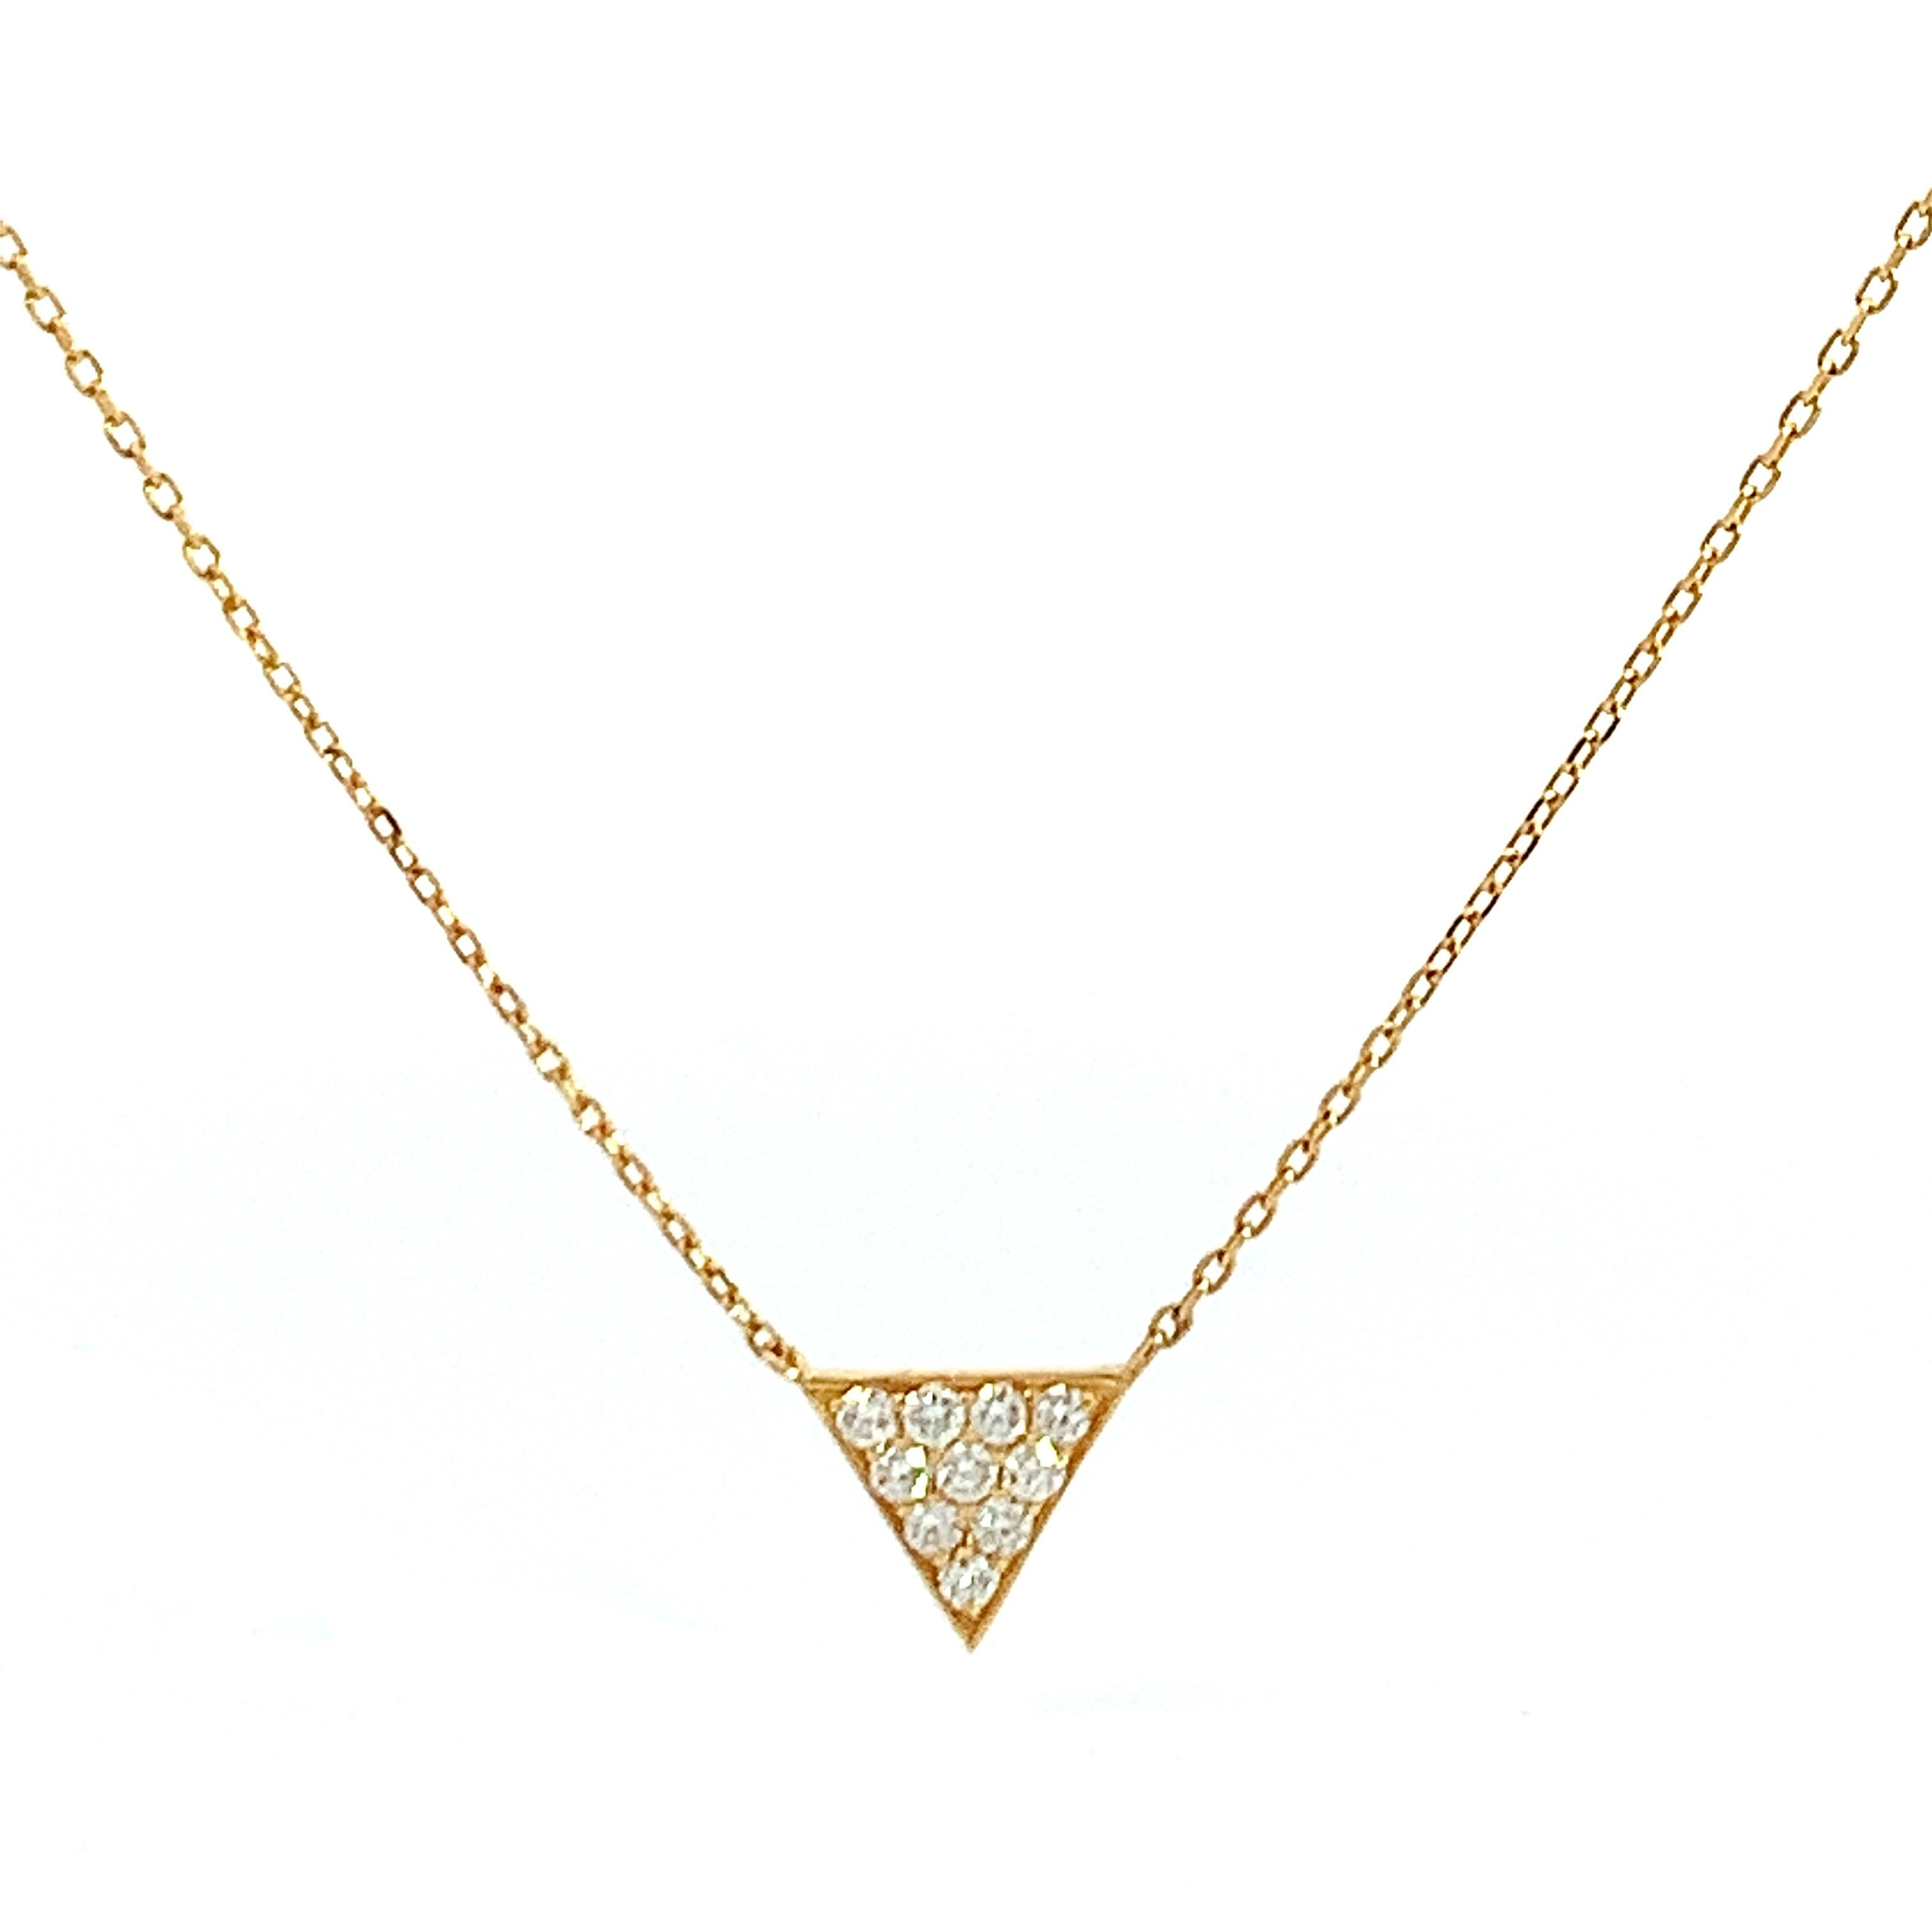 The Pave Triangle Necklace- 50% OFF!